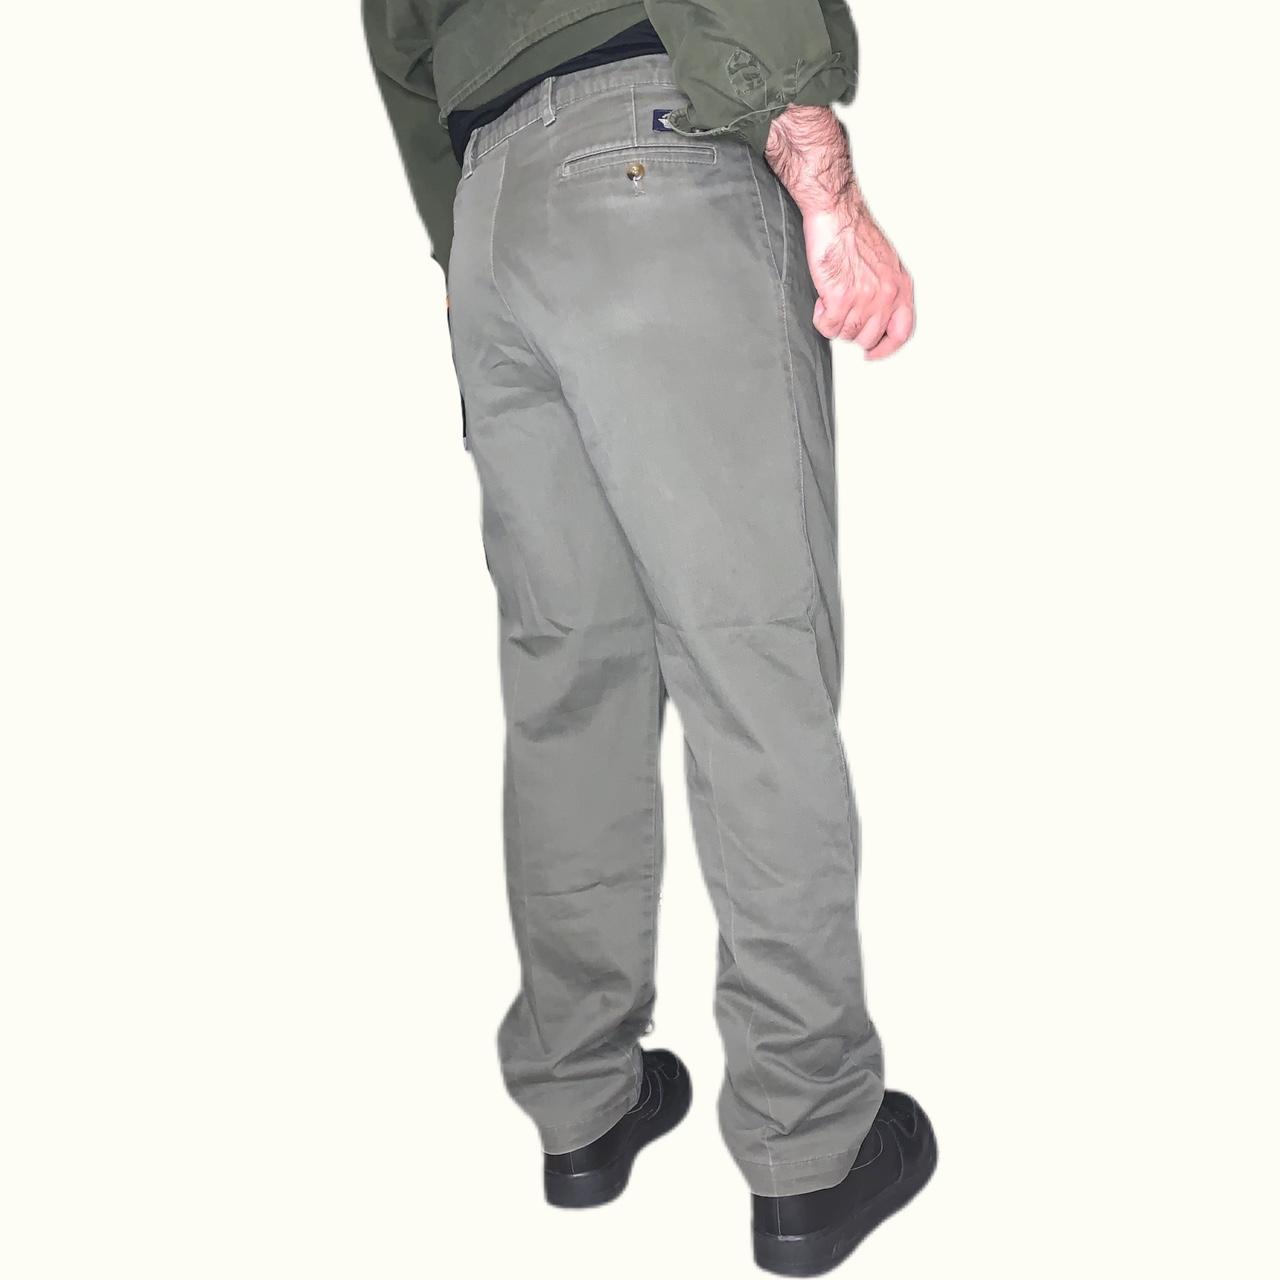 Product Image 3 - Vintage olive green dockers

Perfect pair